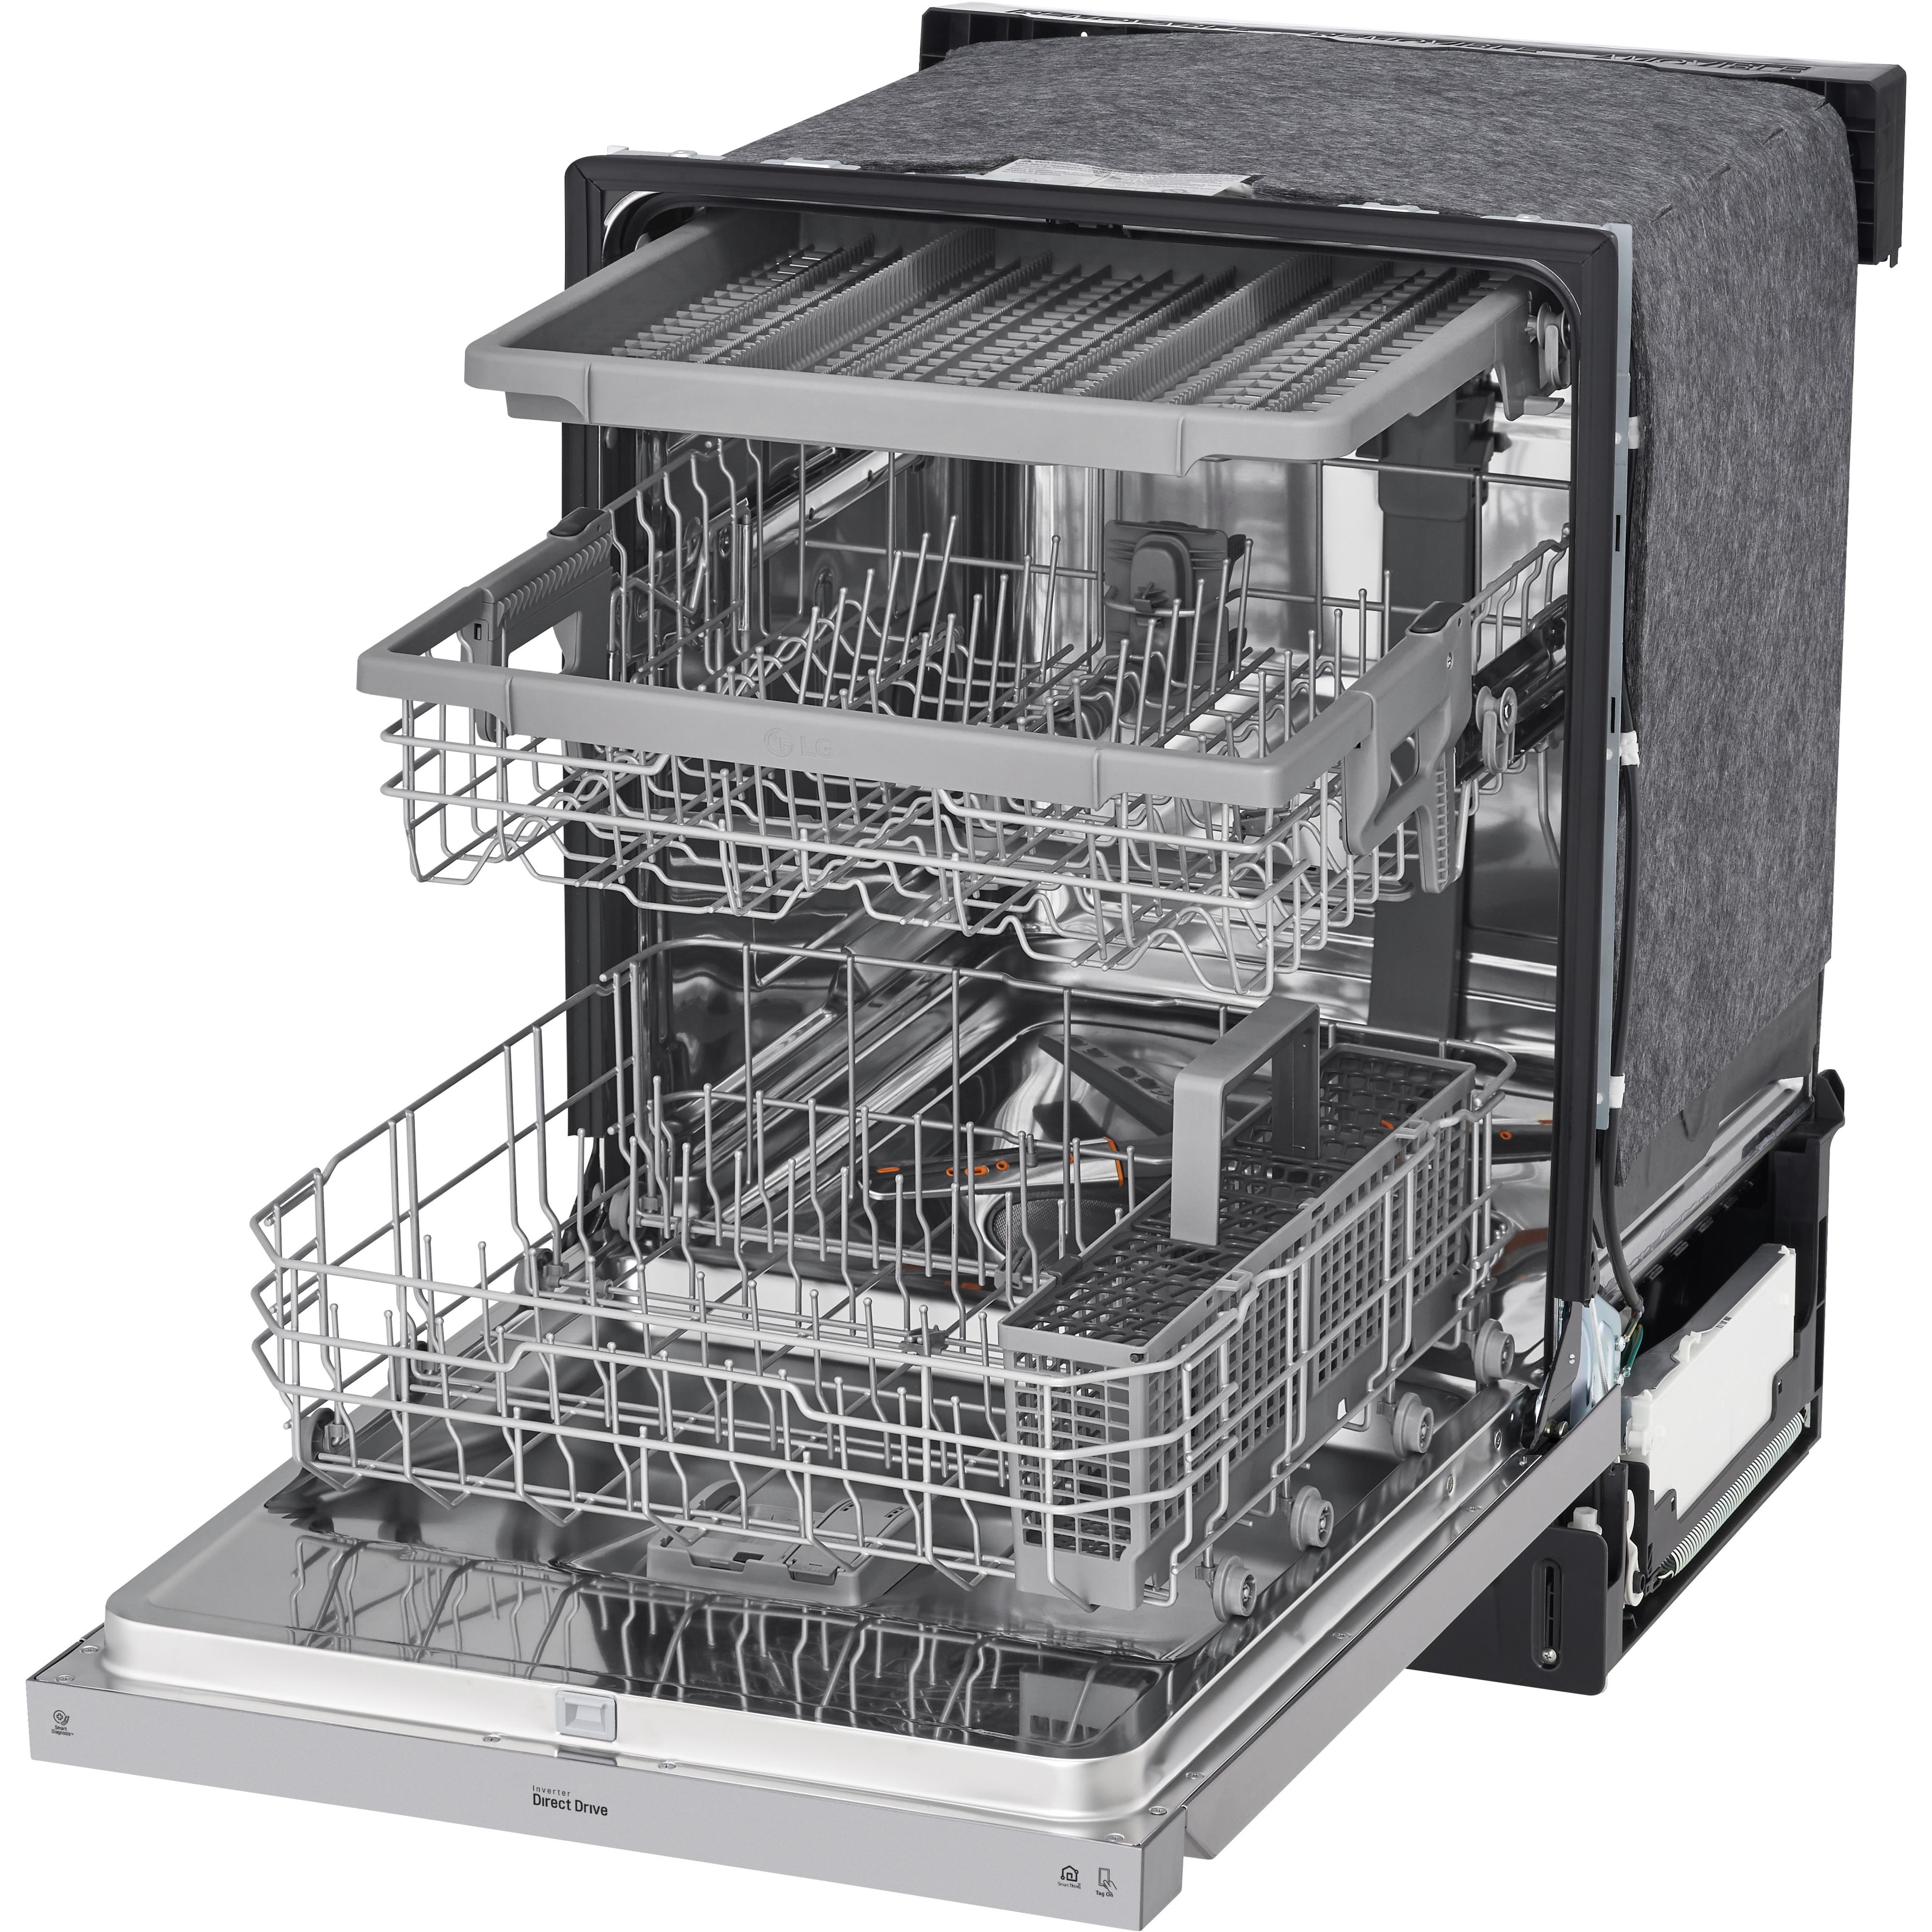 LG 24-inch Built-in Dishwasher with QuadWash? System LDFN4542S